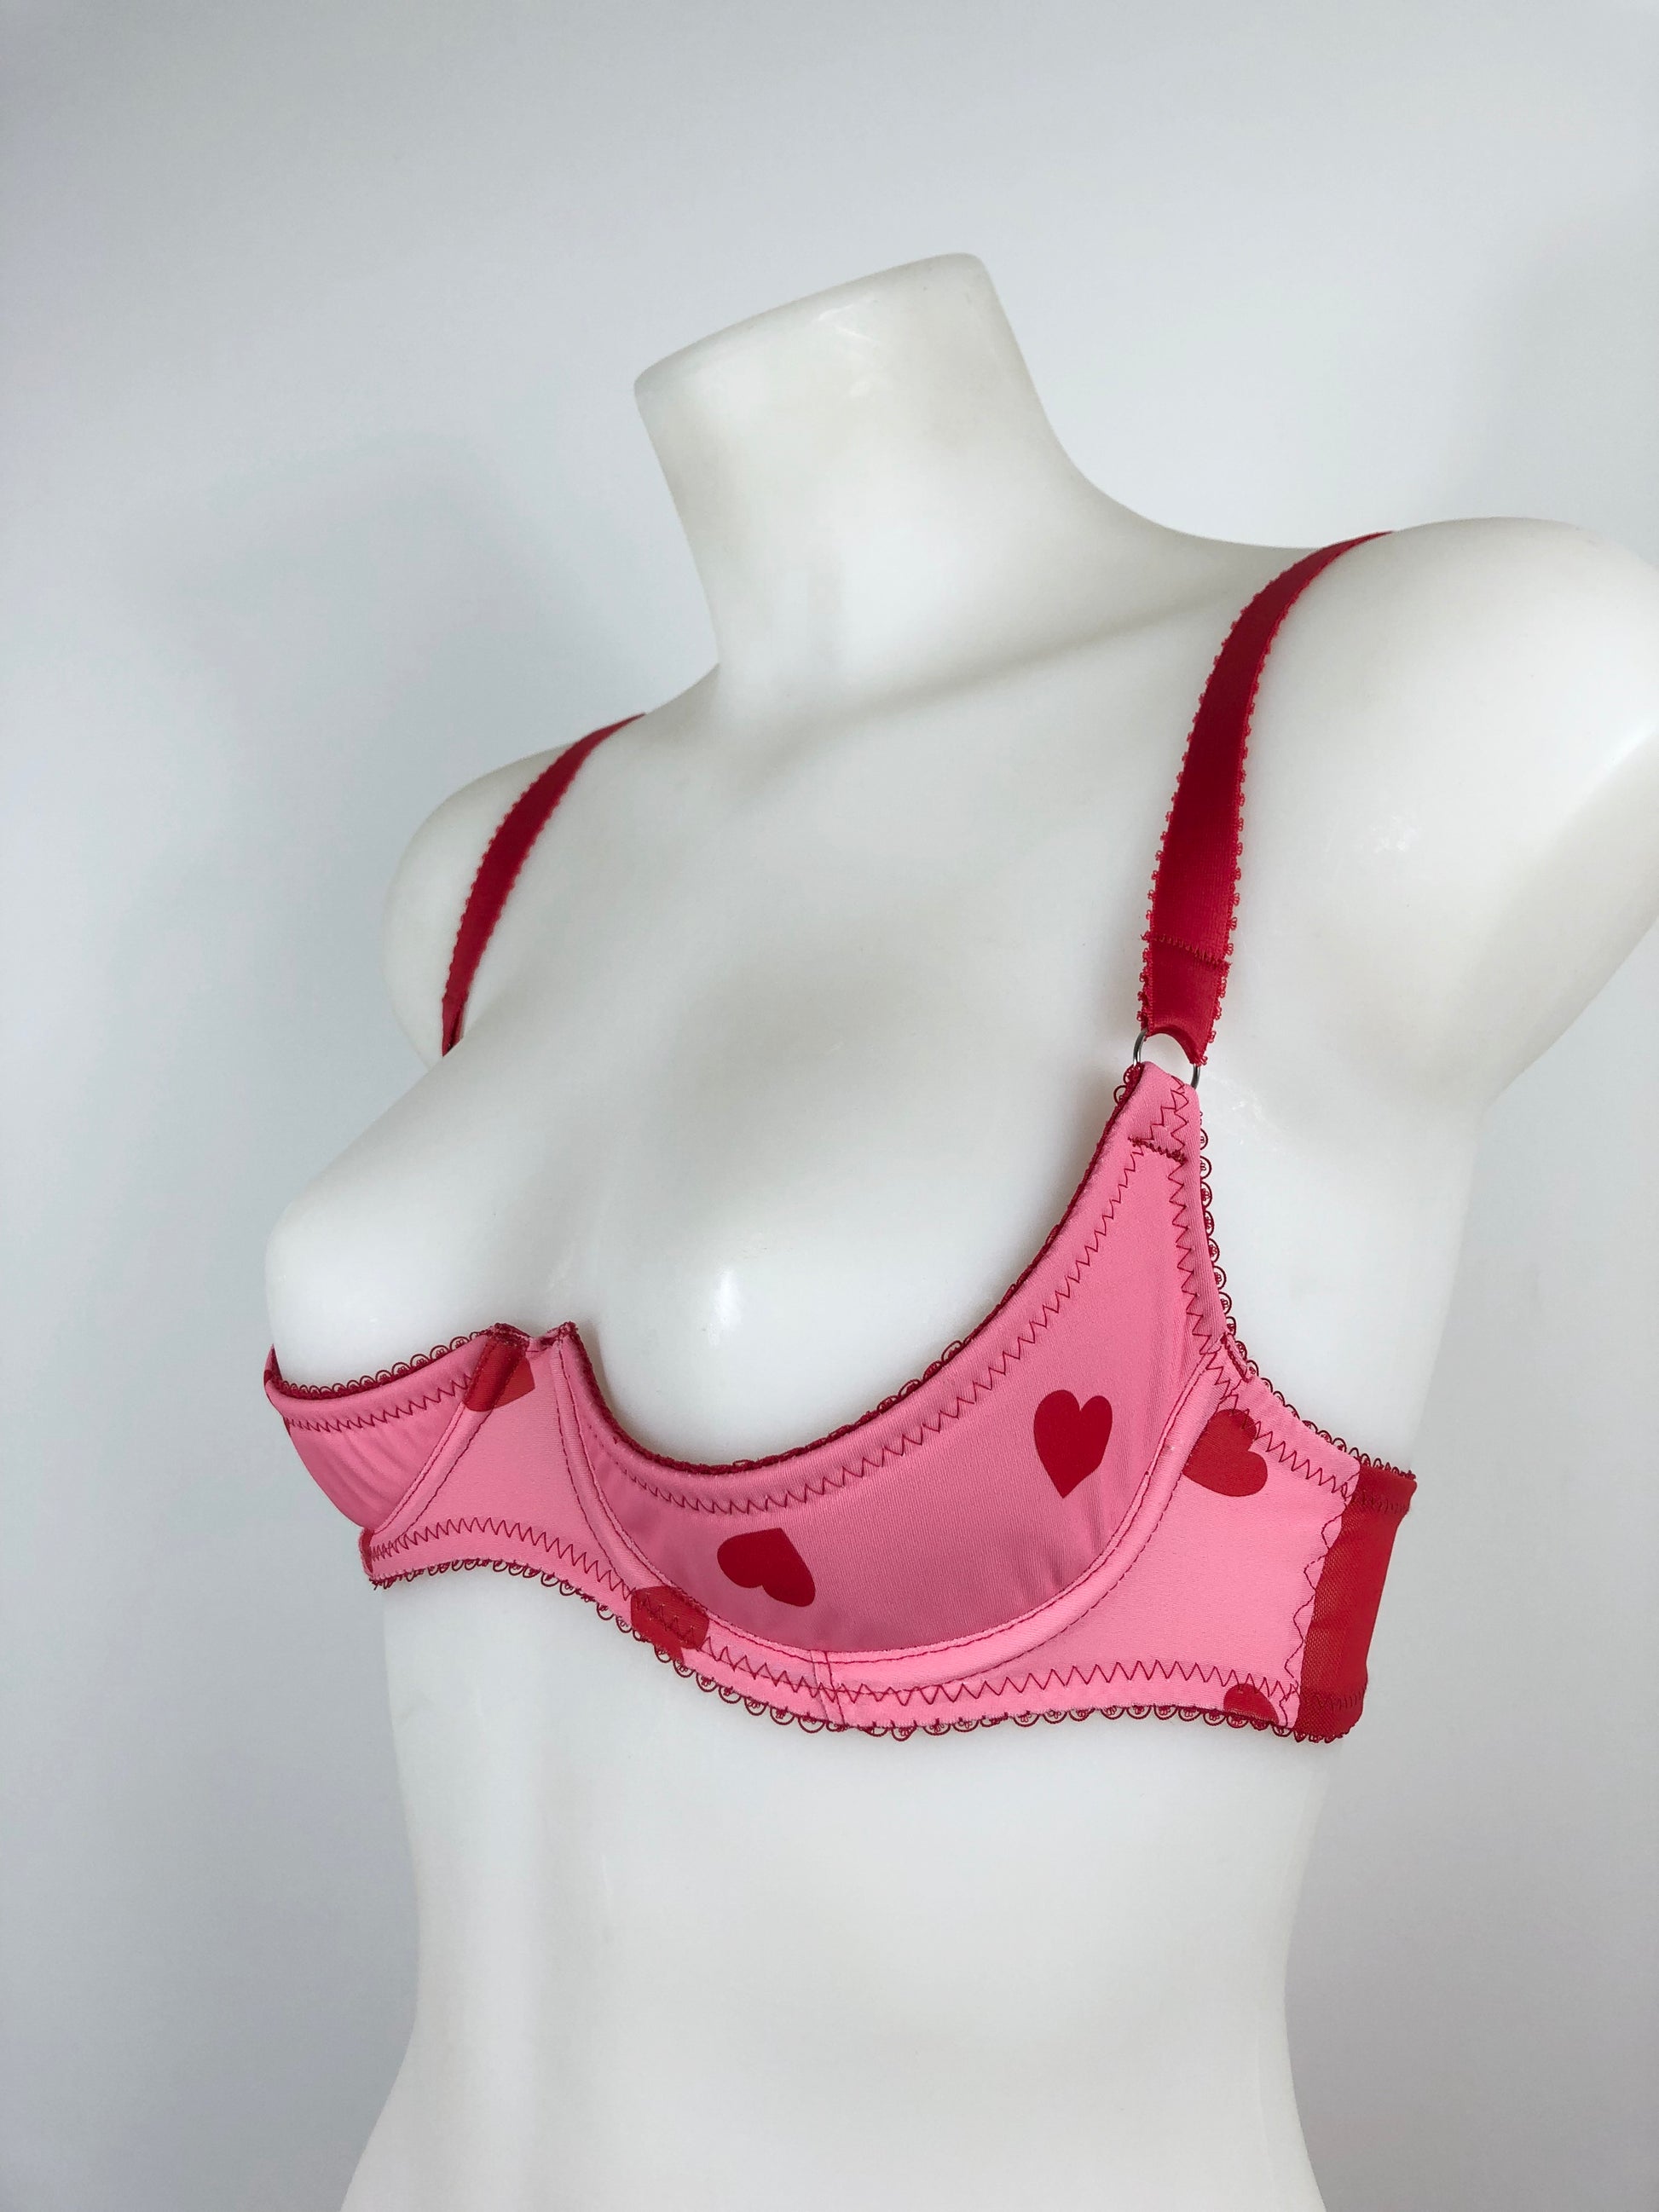 red and pink cheesecake heart lingerie. vintage inspired quarter cup shelf bra with pink heart front and red mesh sides, perfect for valentines cheesecake pin ups,  A fun, bold, playful retro inspired underwear set